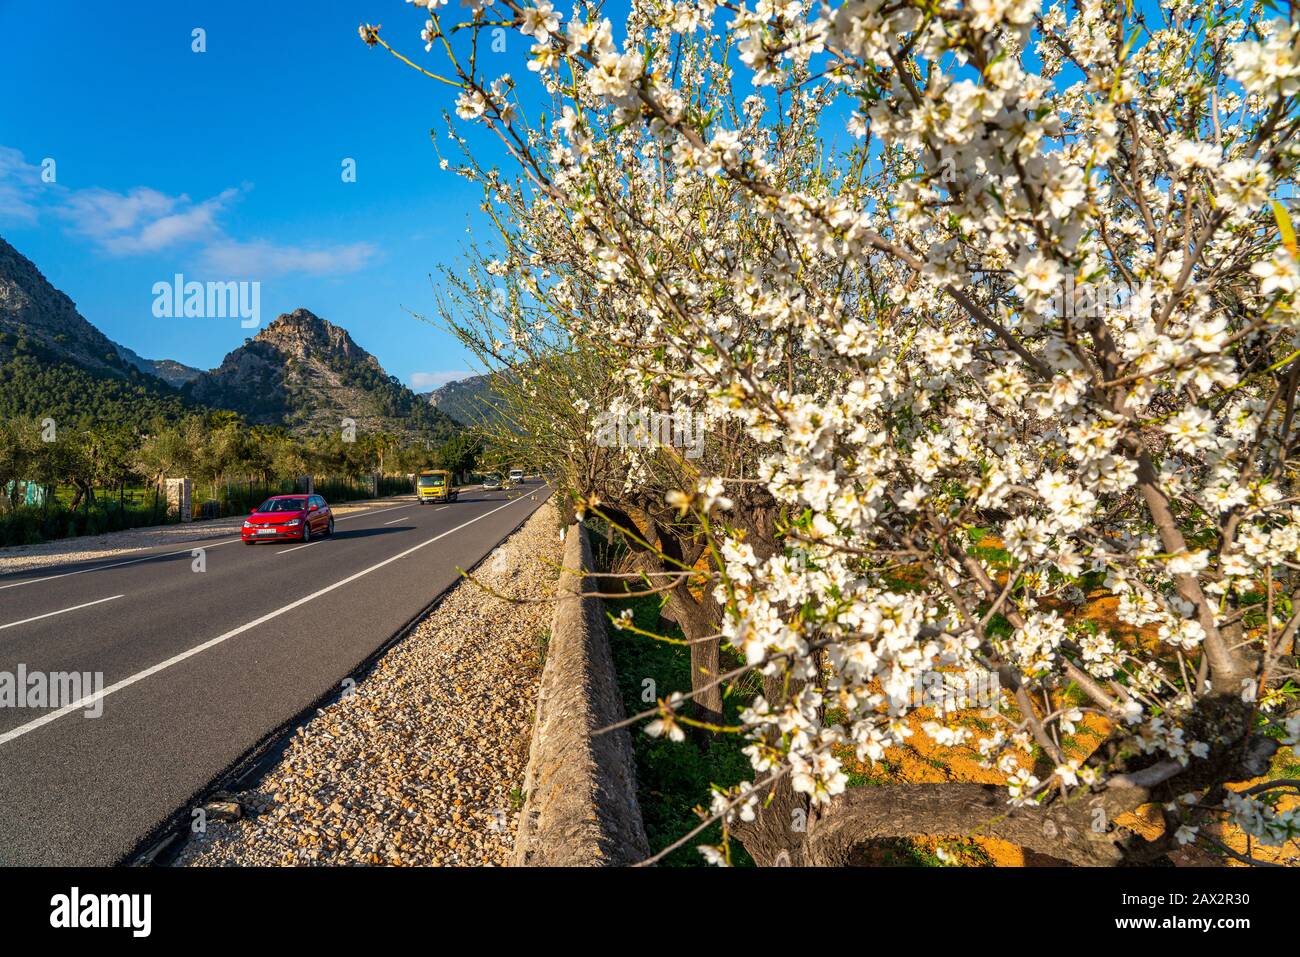 Almond blossom in Mallorca, from January to March many hundreds of thousands of almond trees bloom on the Balearic Islands, near Bunyola, Mallorca, Sp Stock Photo